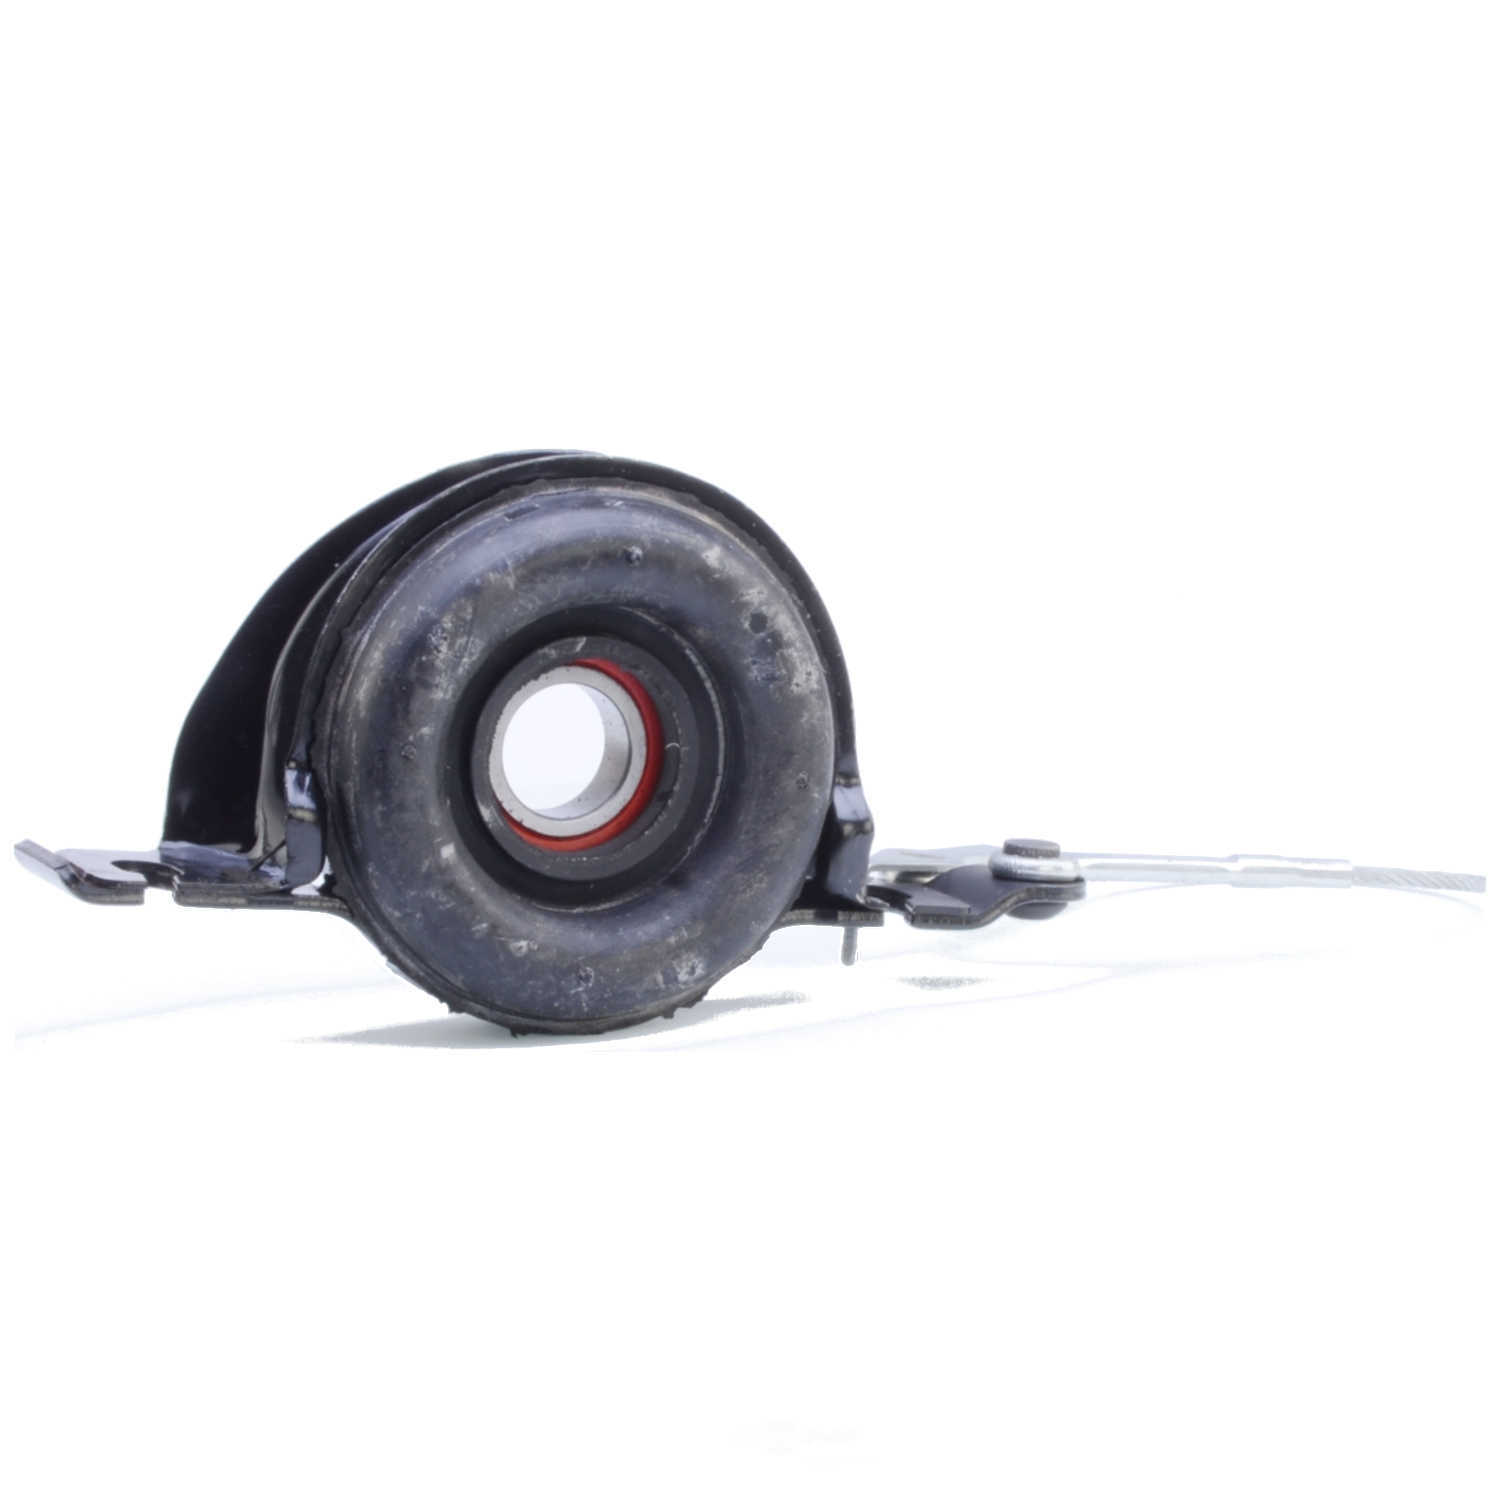 ANCHOR - Drive Shaft Center Support Bearing - ANH 6076